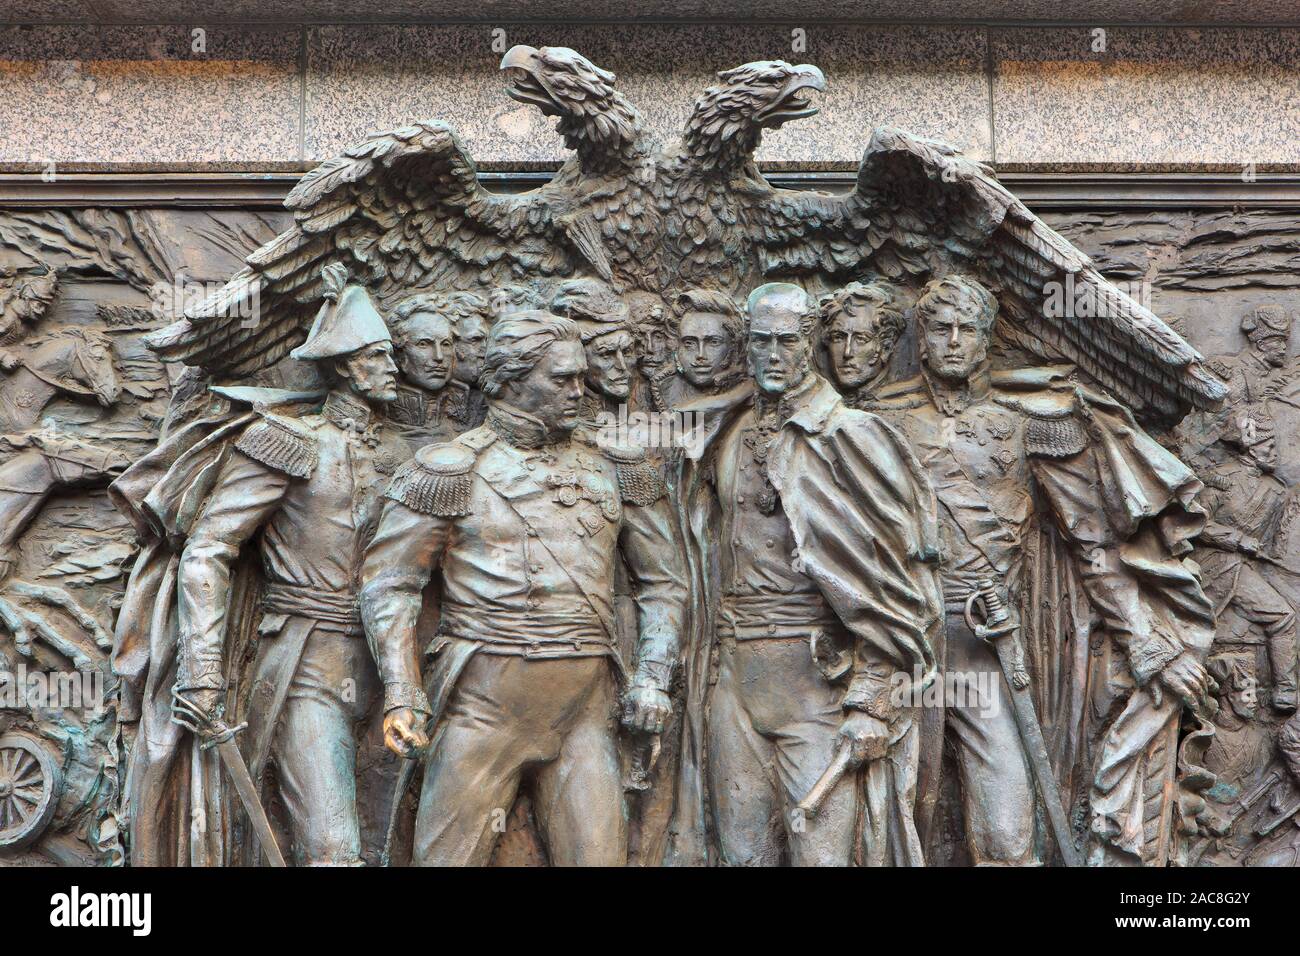 Bas-relief of Tsar Alexander I of Russia's generals Mikhail Kutuzov, Michael Barclay de Tolly & Pyotr Bagration at Alexander Garden in Moscow, Russia Stock Photo